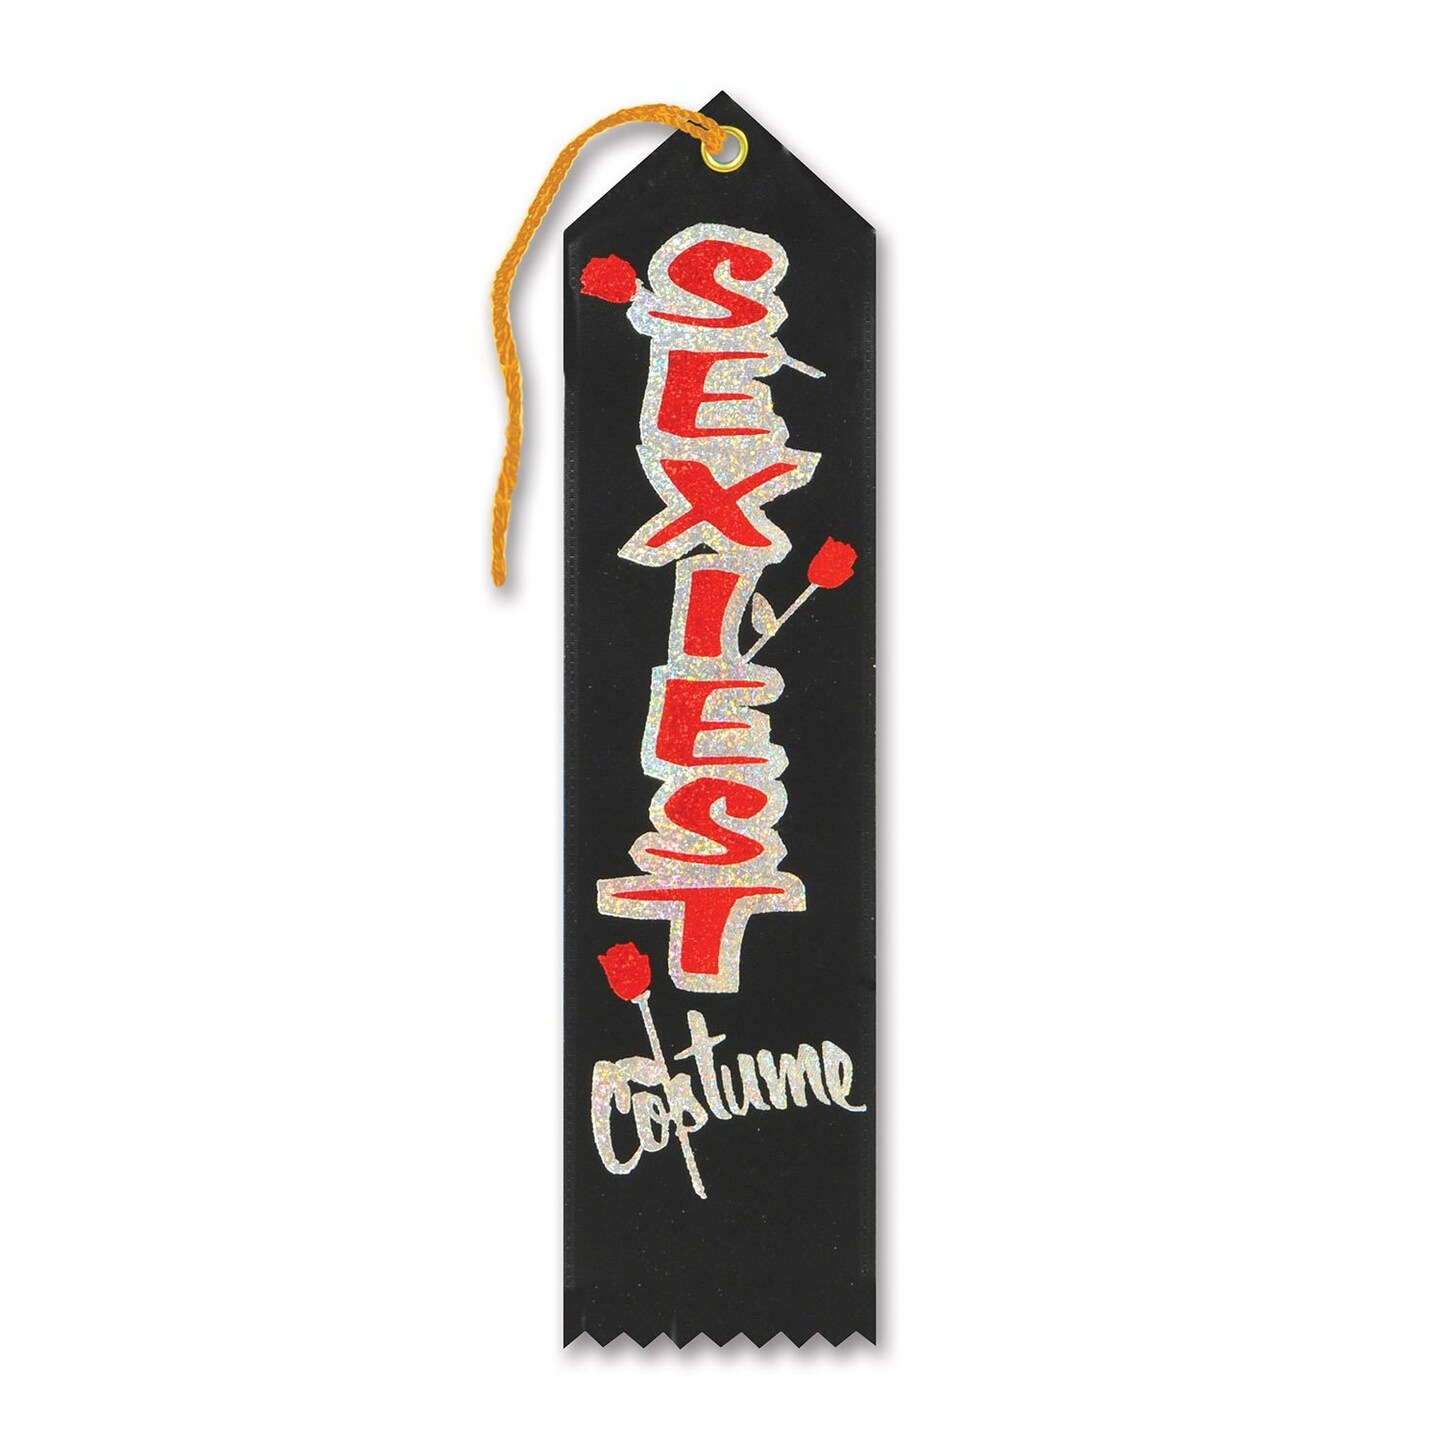 Sexiest Costume Award Ribbon Pack Of 6 Michaels 3002